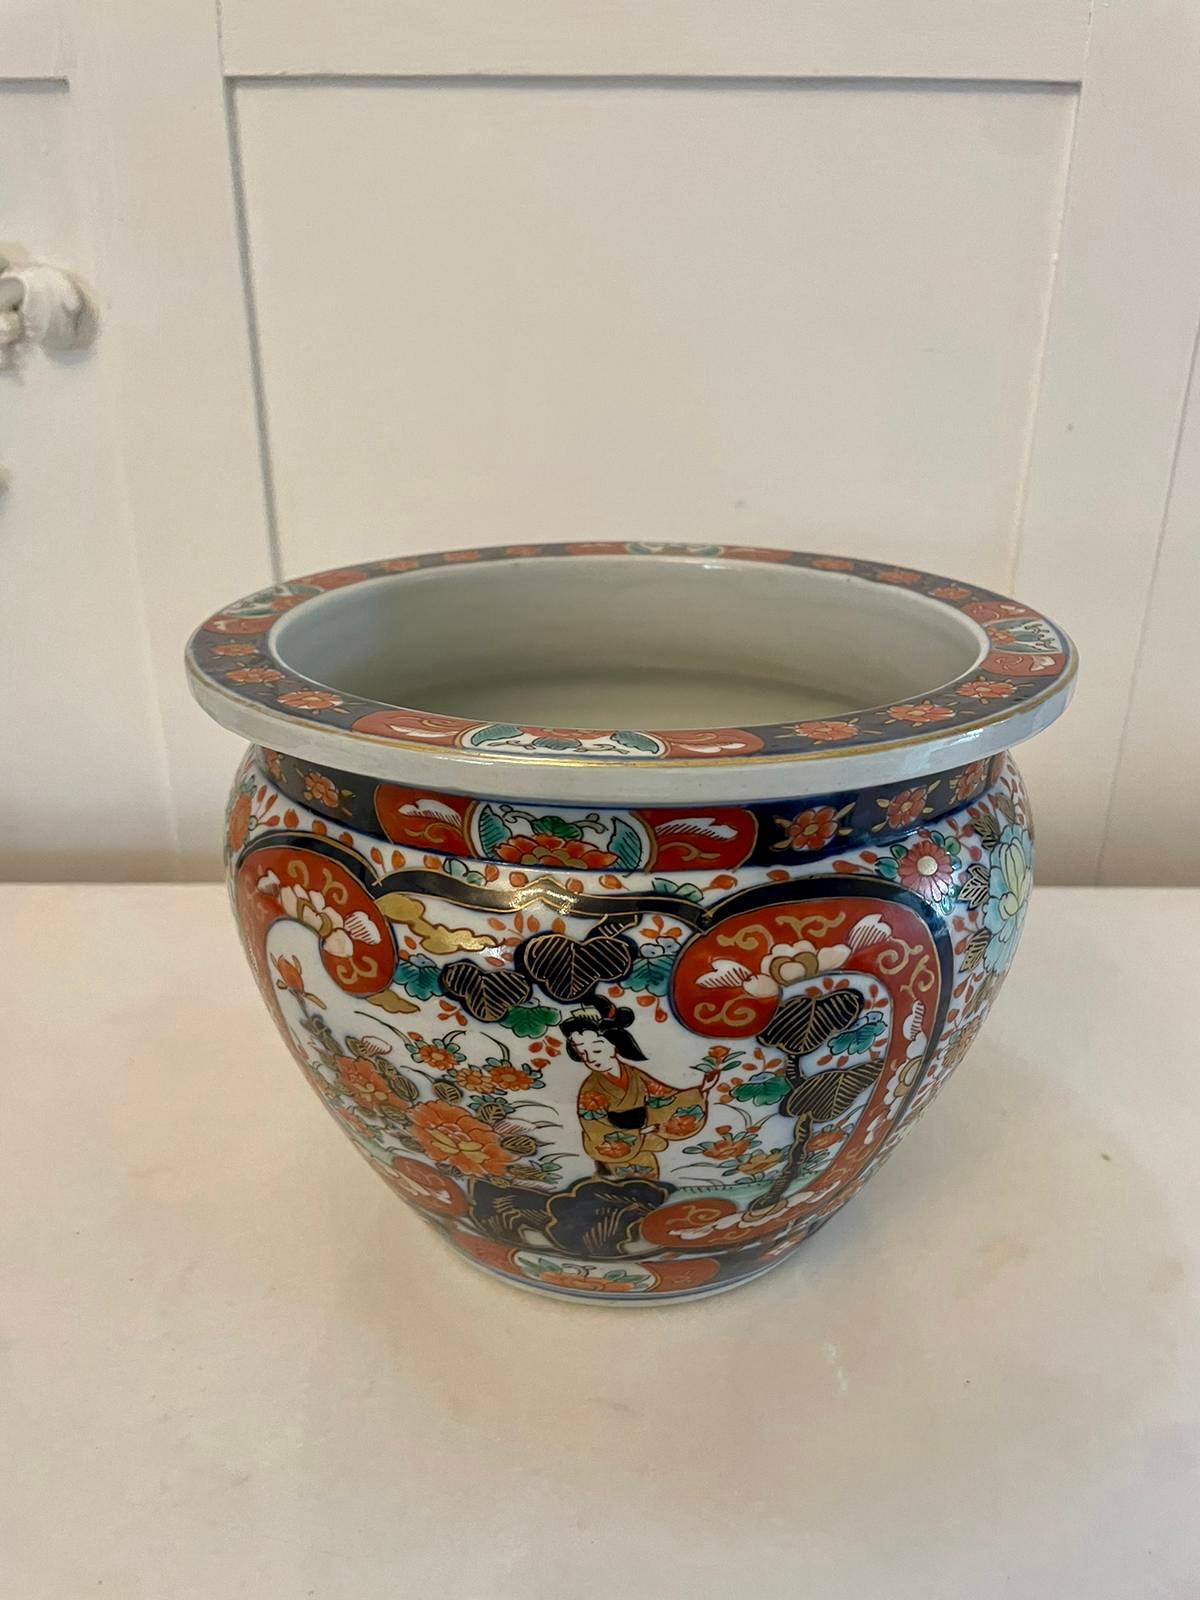 Outstanding quality antique Japanese hand painted Imari jardinière in wonderful blue, red, green yellow, white and gold colours 

A charming example boasting wonderful colours

Dimensions:
Height 16.7 cm (6.57 in)
Width 21.5 cm (8.46